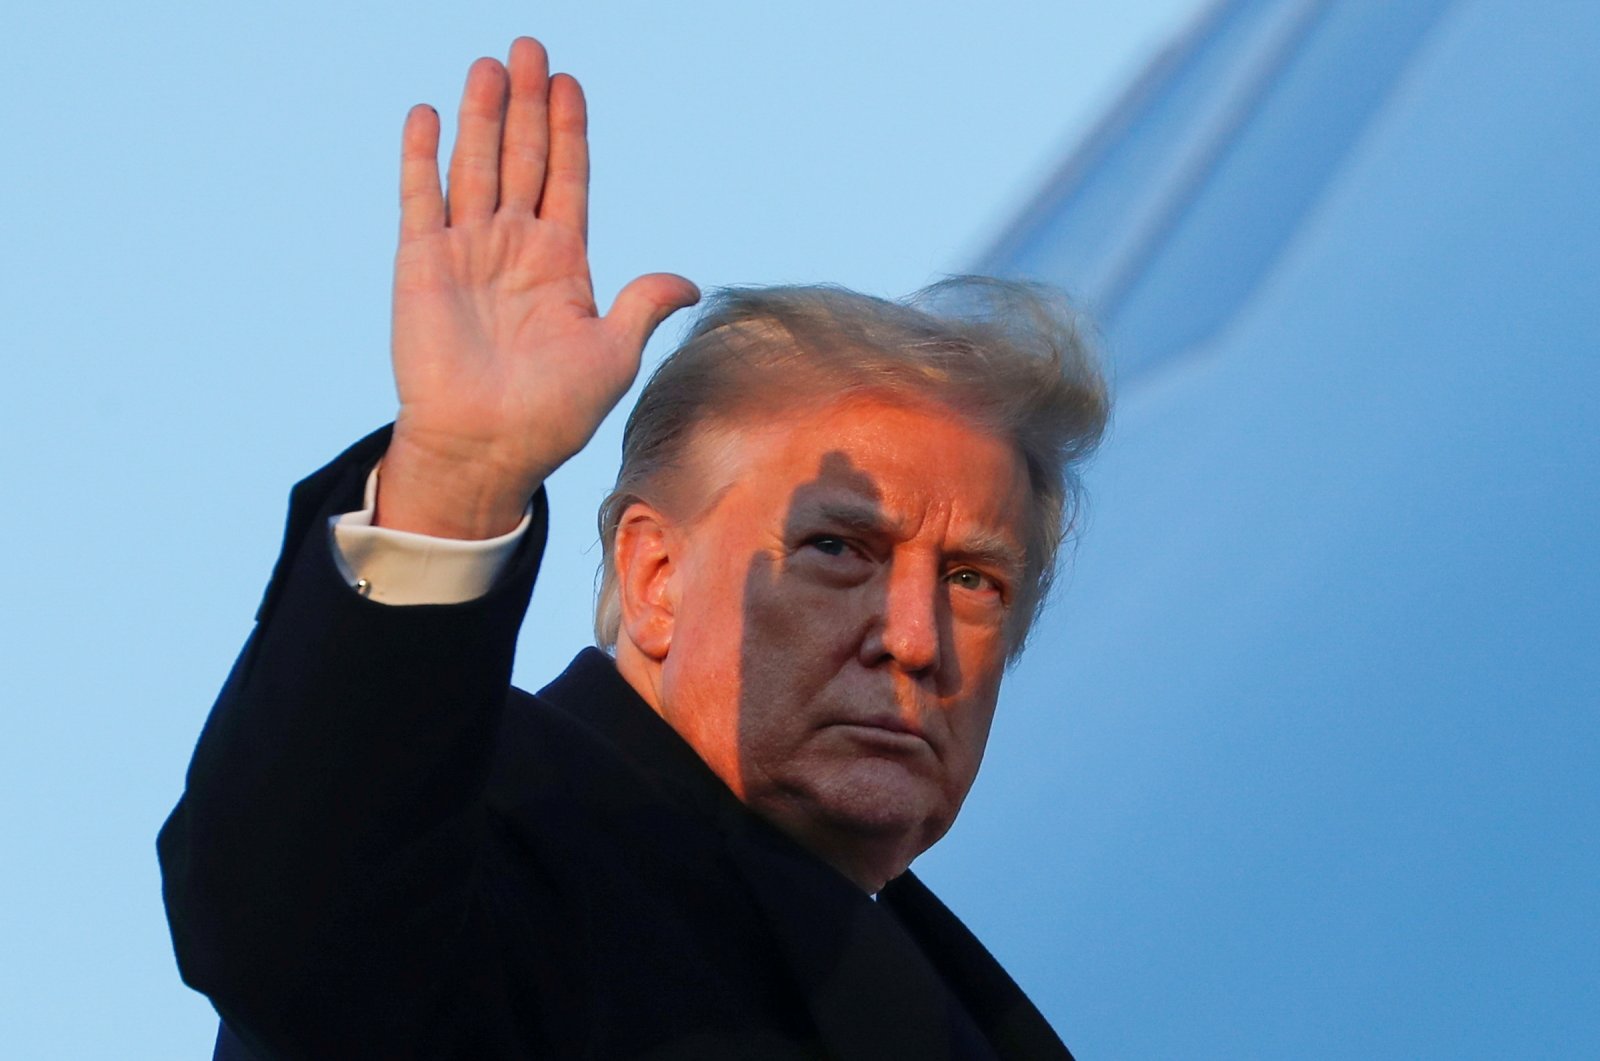 U.S. President Donald Trump waves as he boards Air Force One at Joint Base Andrews in Maryland, U.S., Dec. 23, 2020. (Reuters Photo)